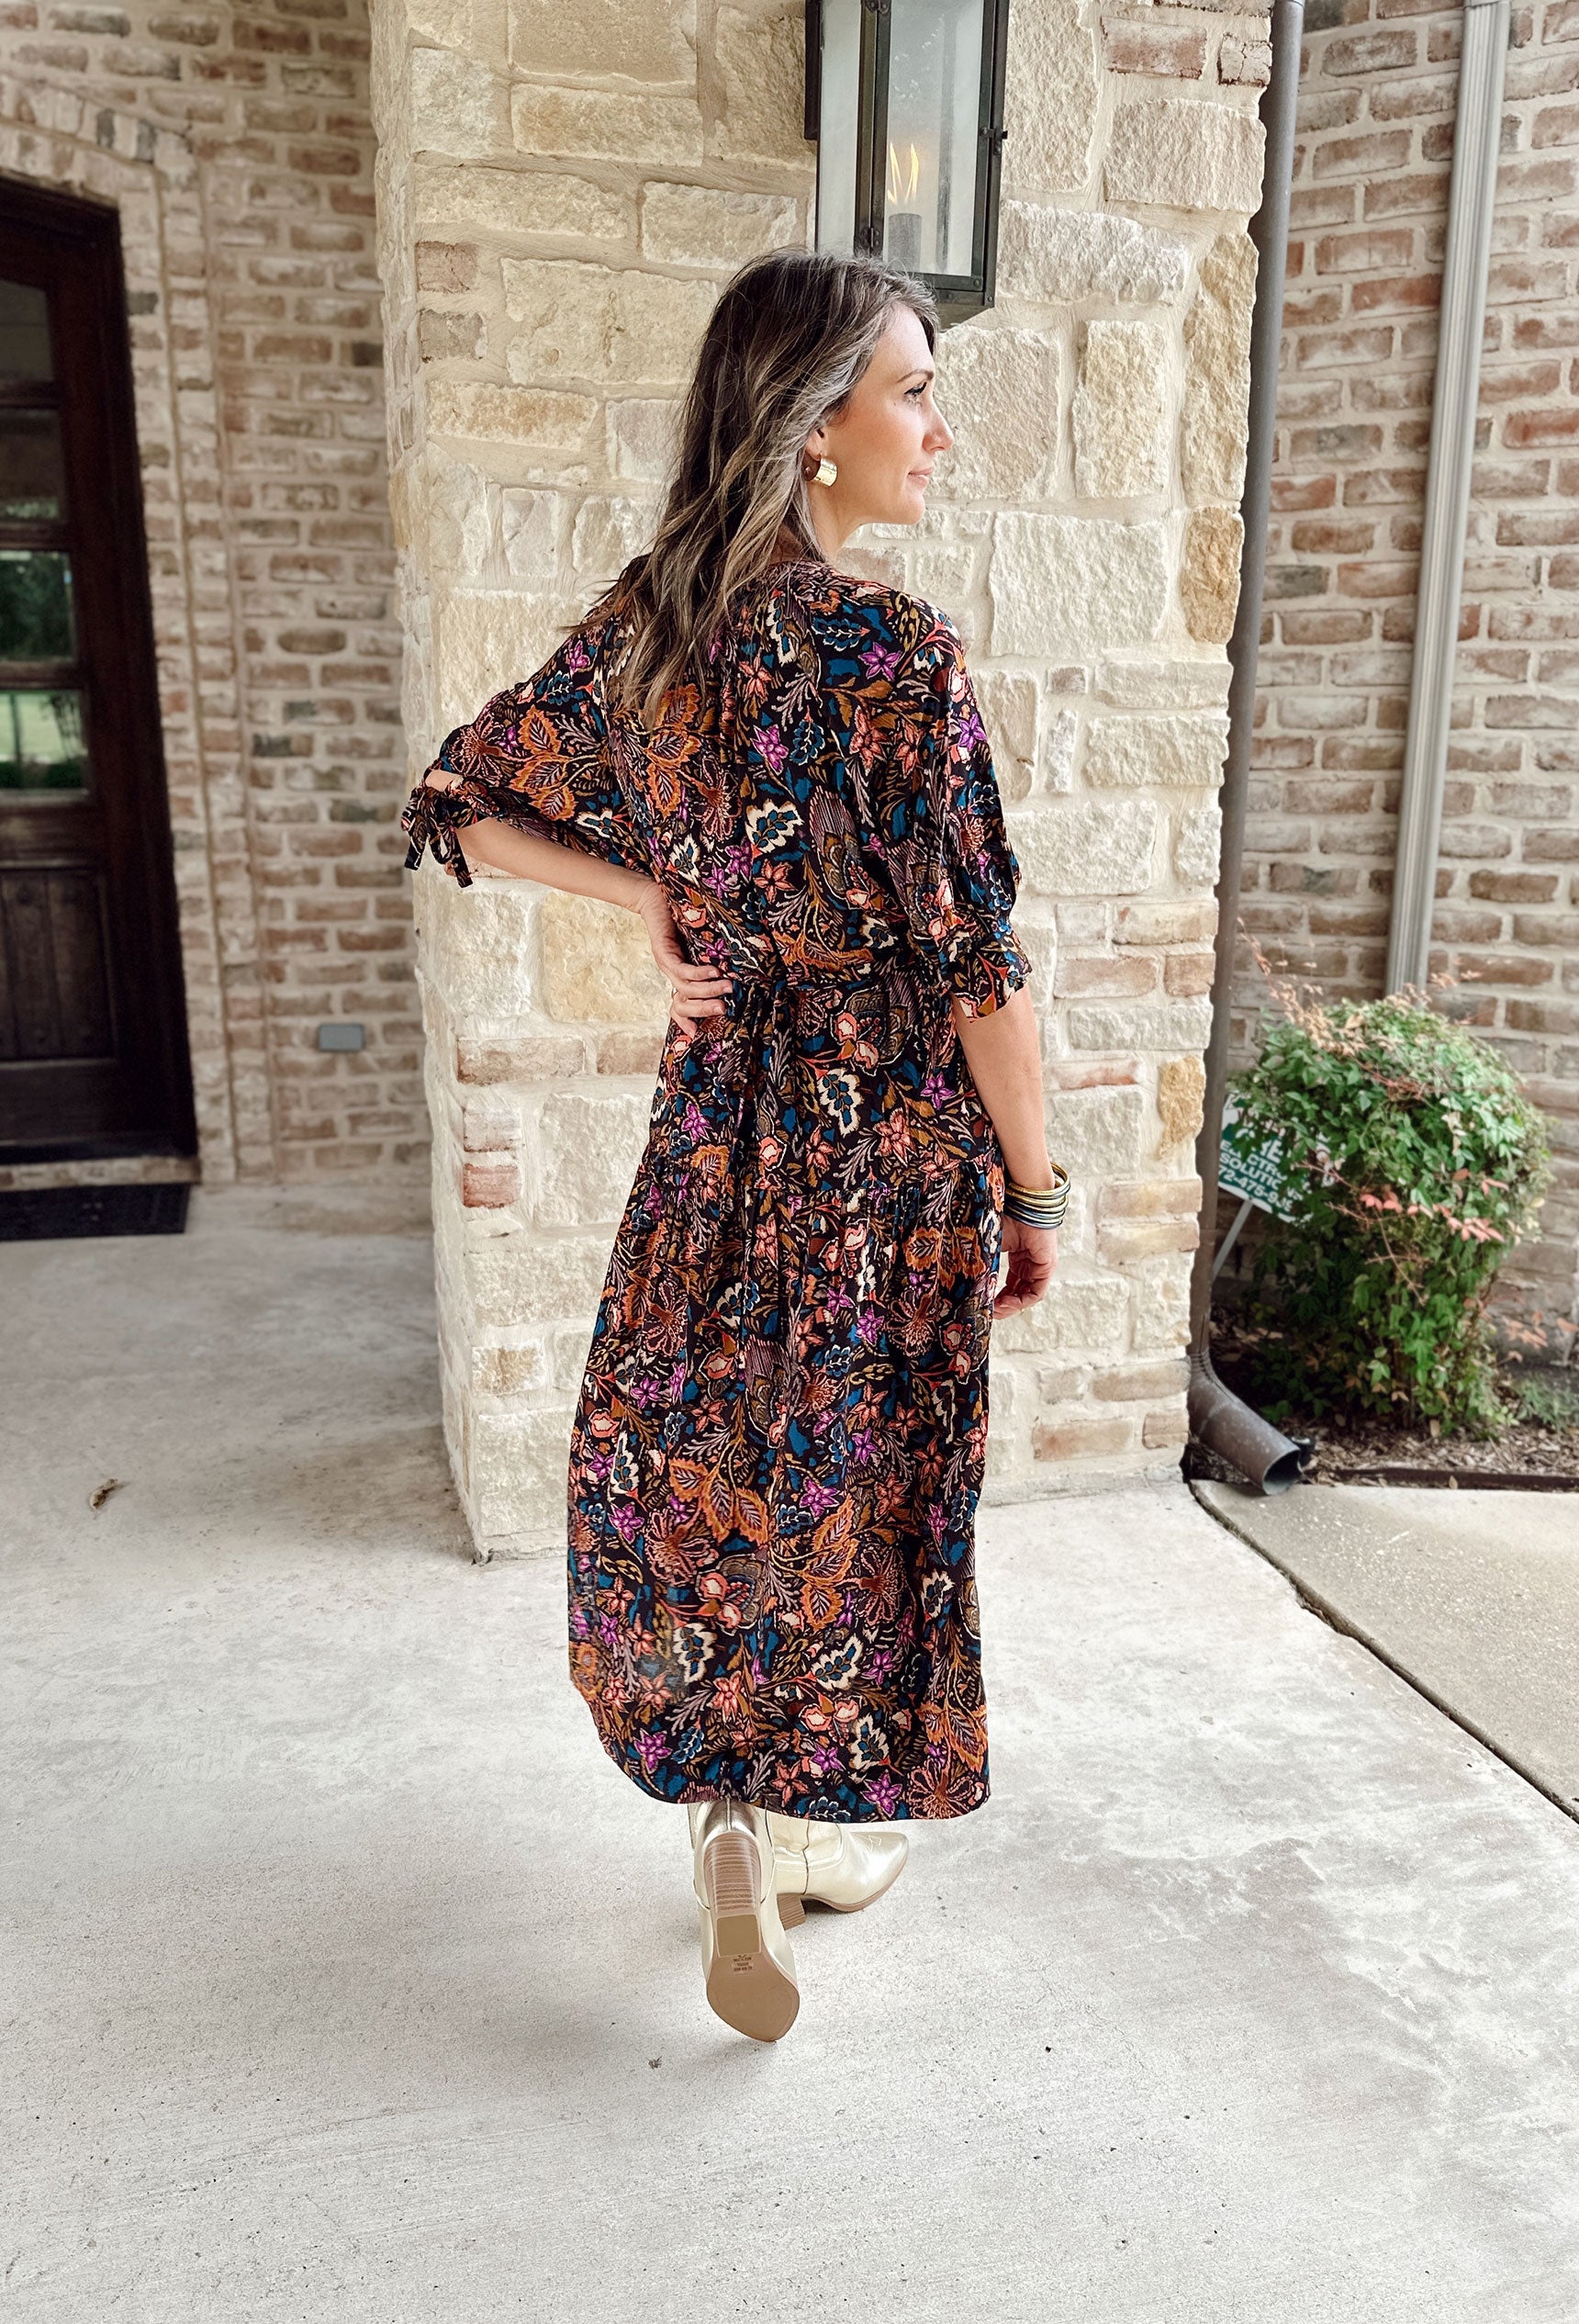 Begin Again Floral Midi Dress, black midi dress with floral and leaf print in orange, teal, cream, and orchid